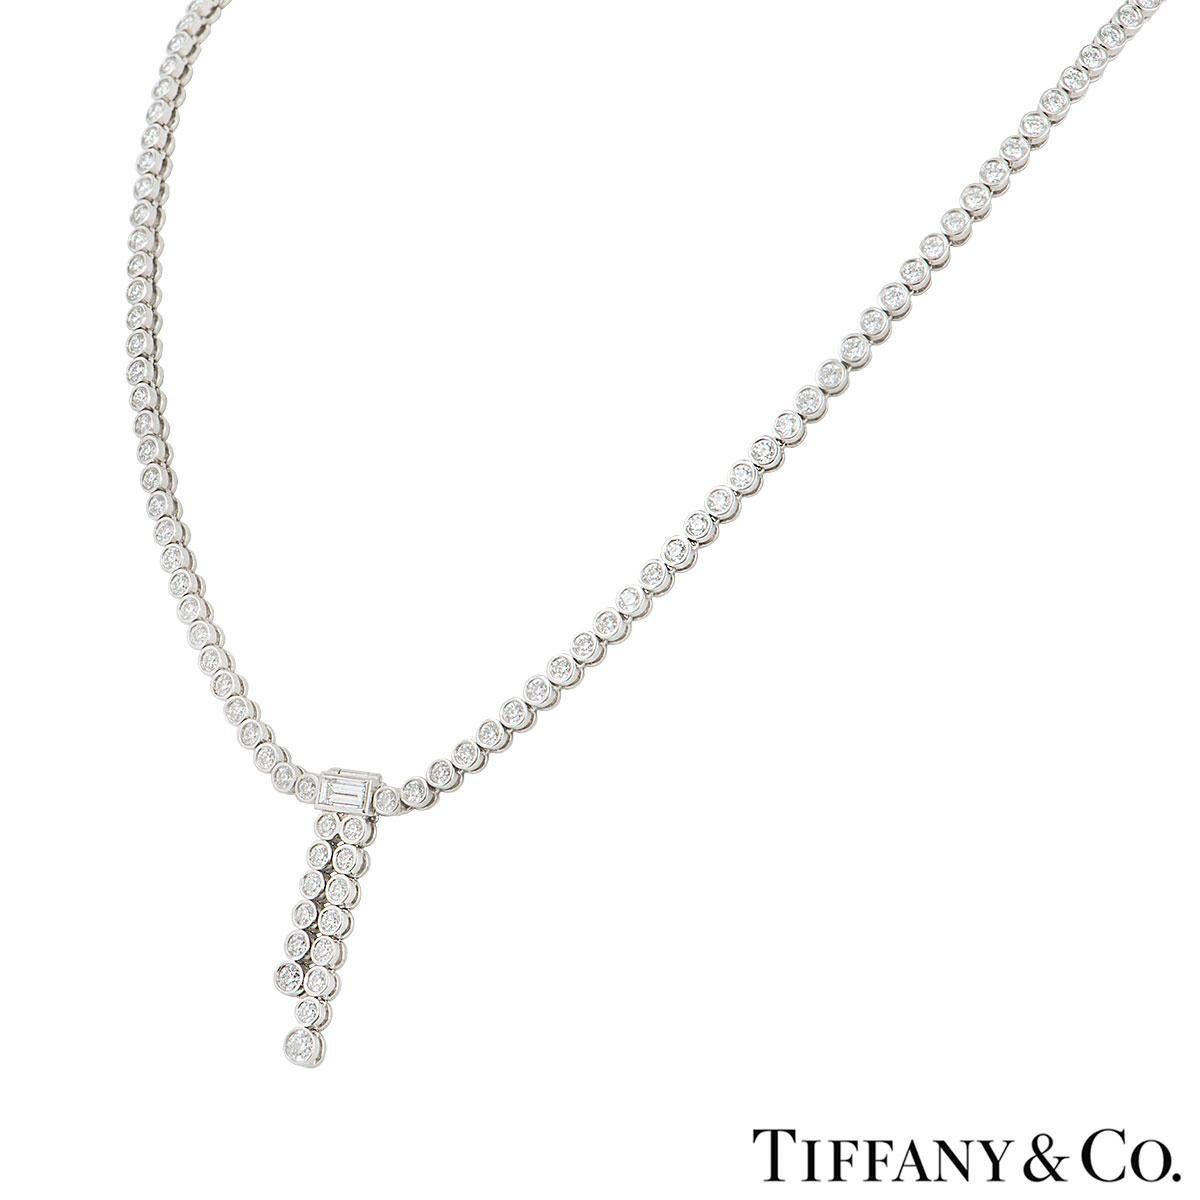 A beautiful platinum diamond necklace by Tiffany & Co. from the Jazz collection. The necklace features a diamond line in a rubover setting with a baguette cut diamond as a centre motif with 2 rows of diamond suspended beneath it. The round brilliant